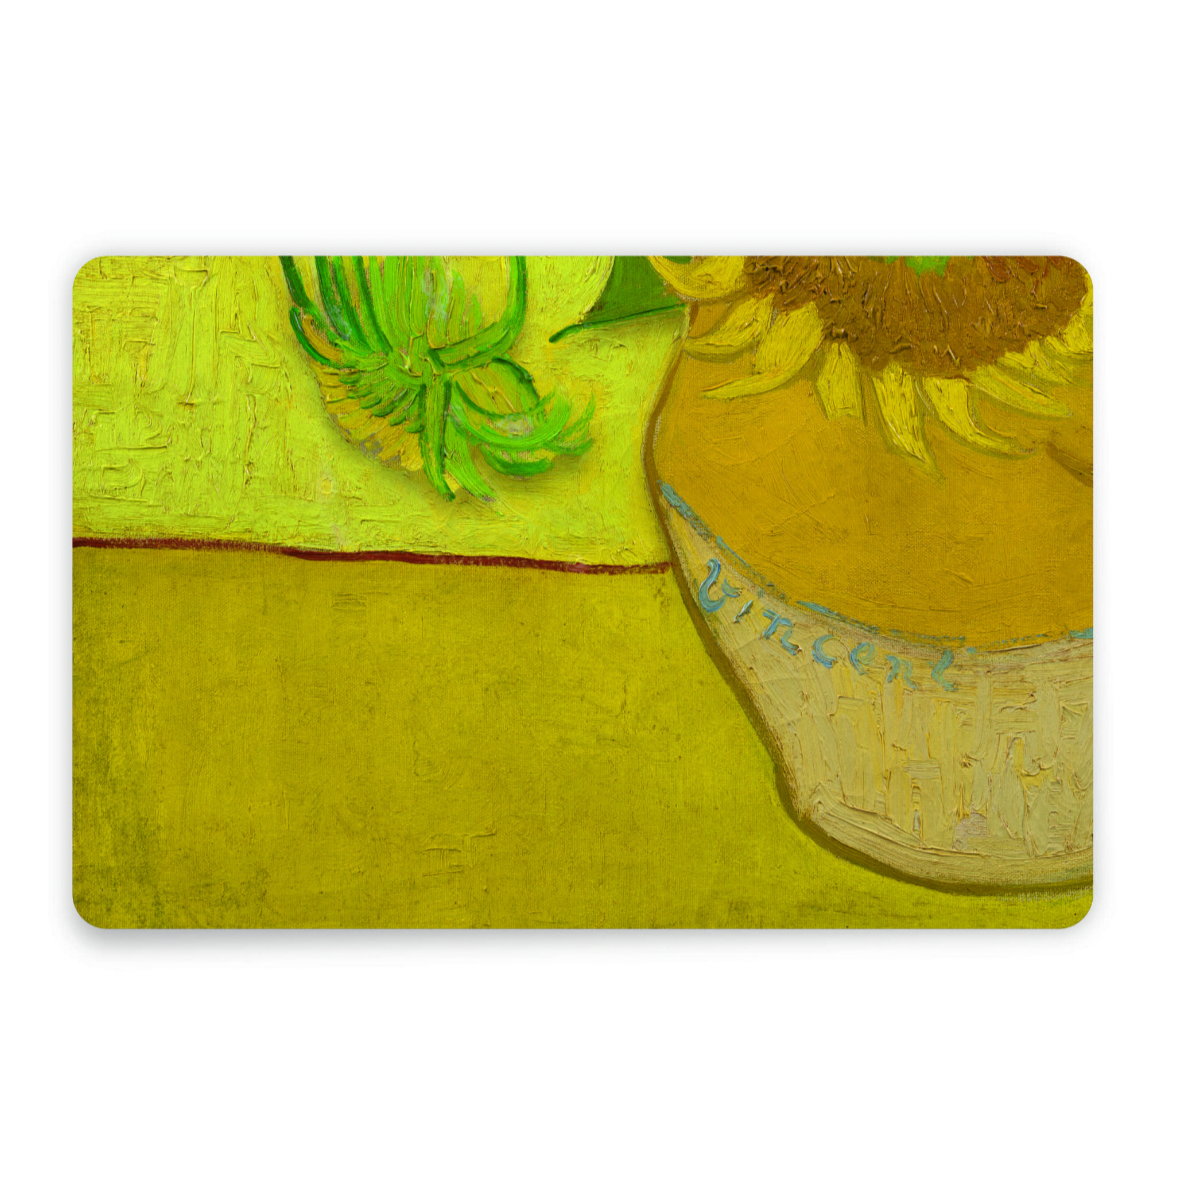 Van Gogh Sunflowers Placemat Set of 2